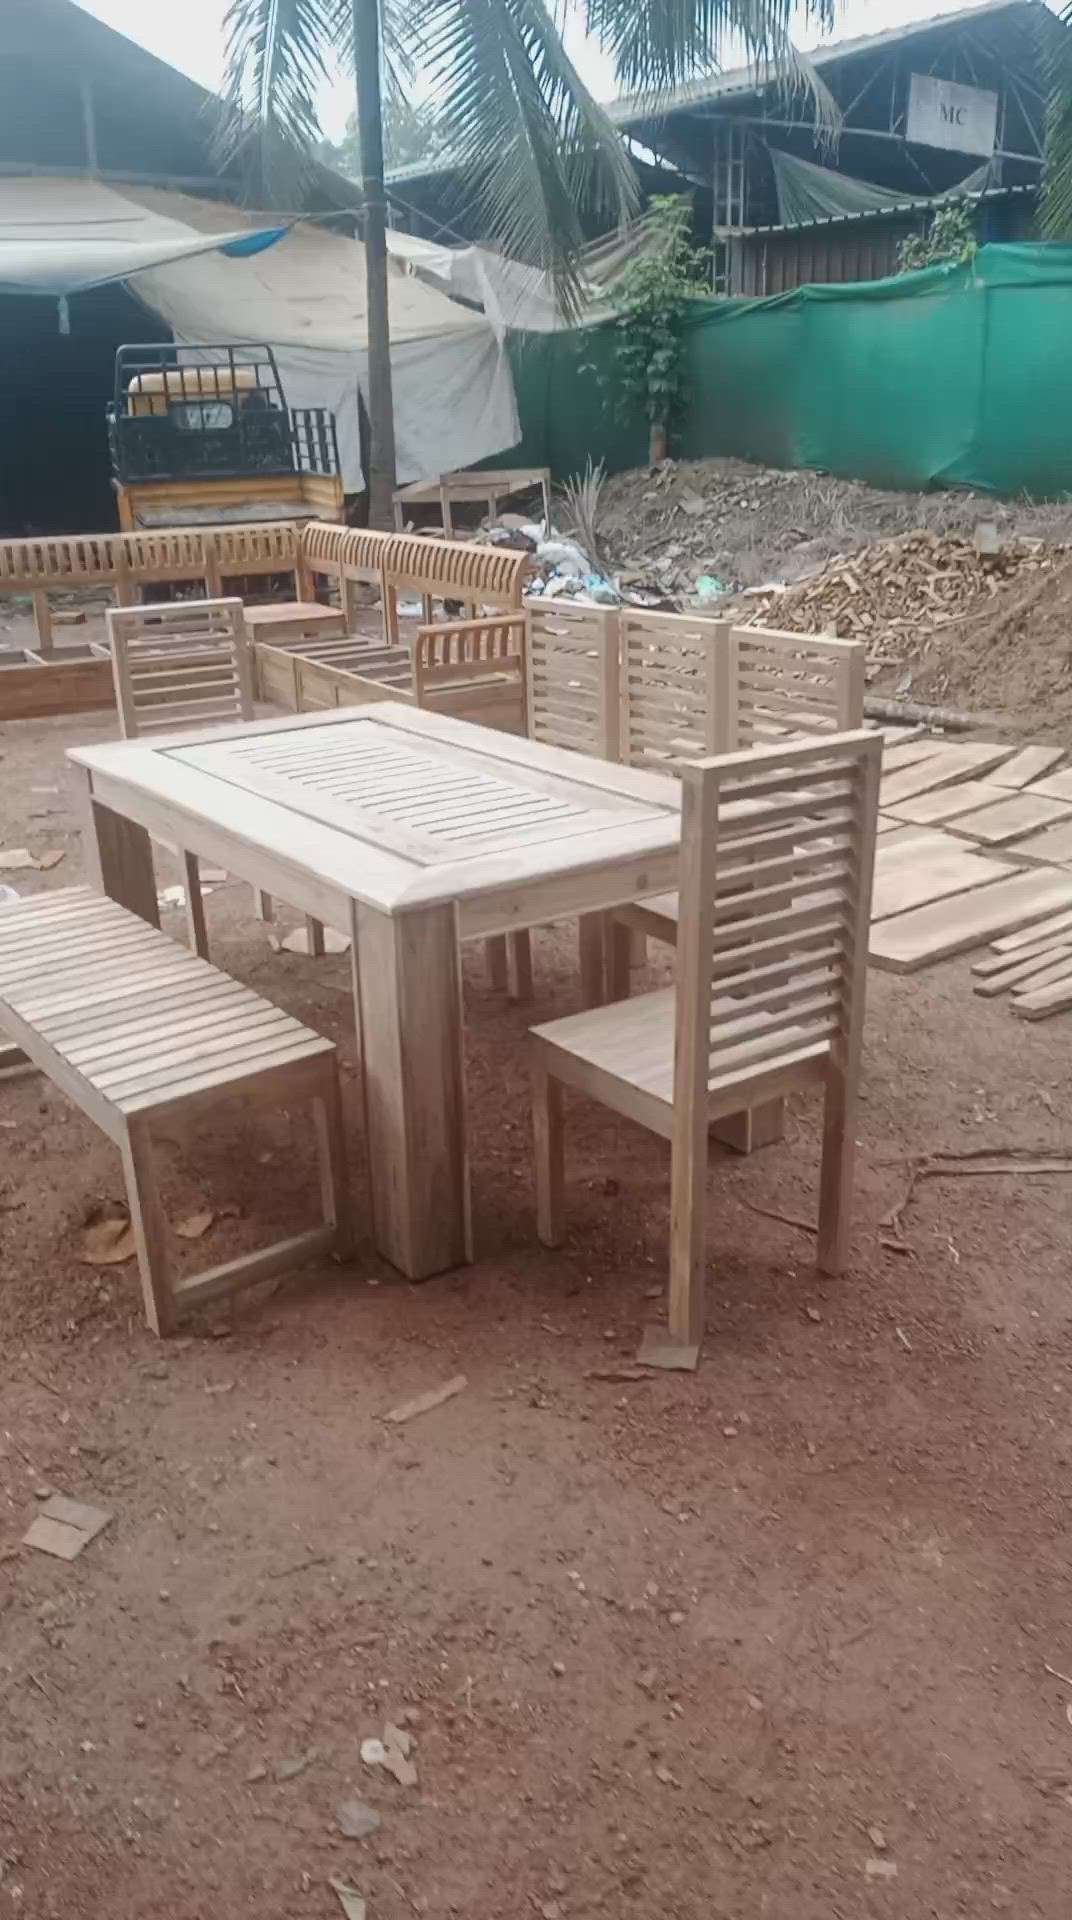 Dining Table set #DiningChairs #DiningTable #woodendiningtable